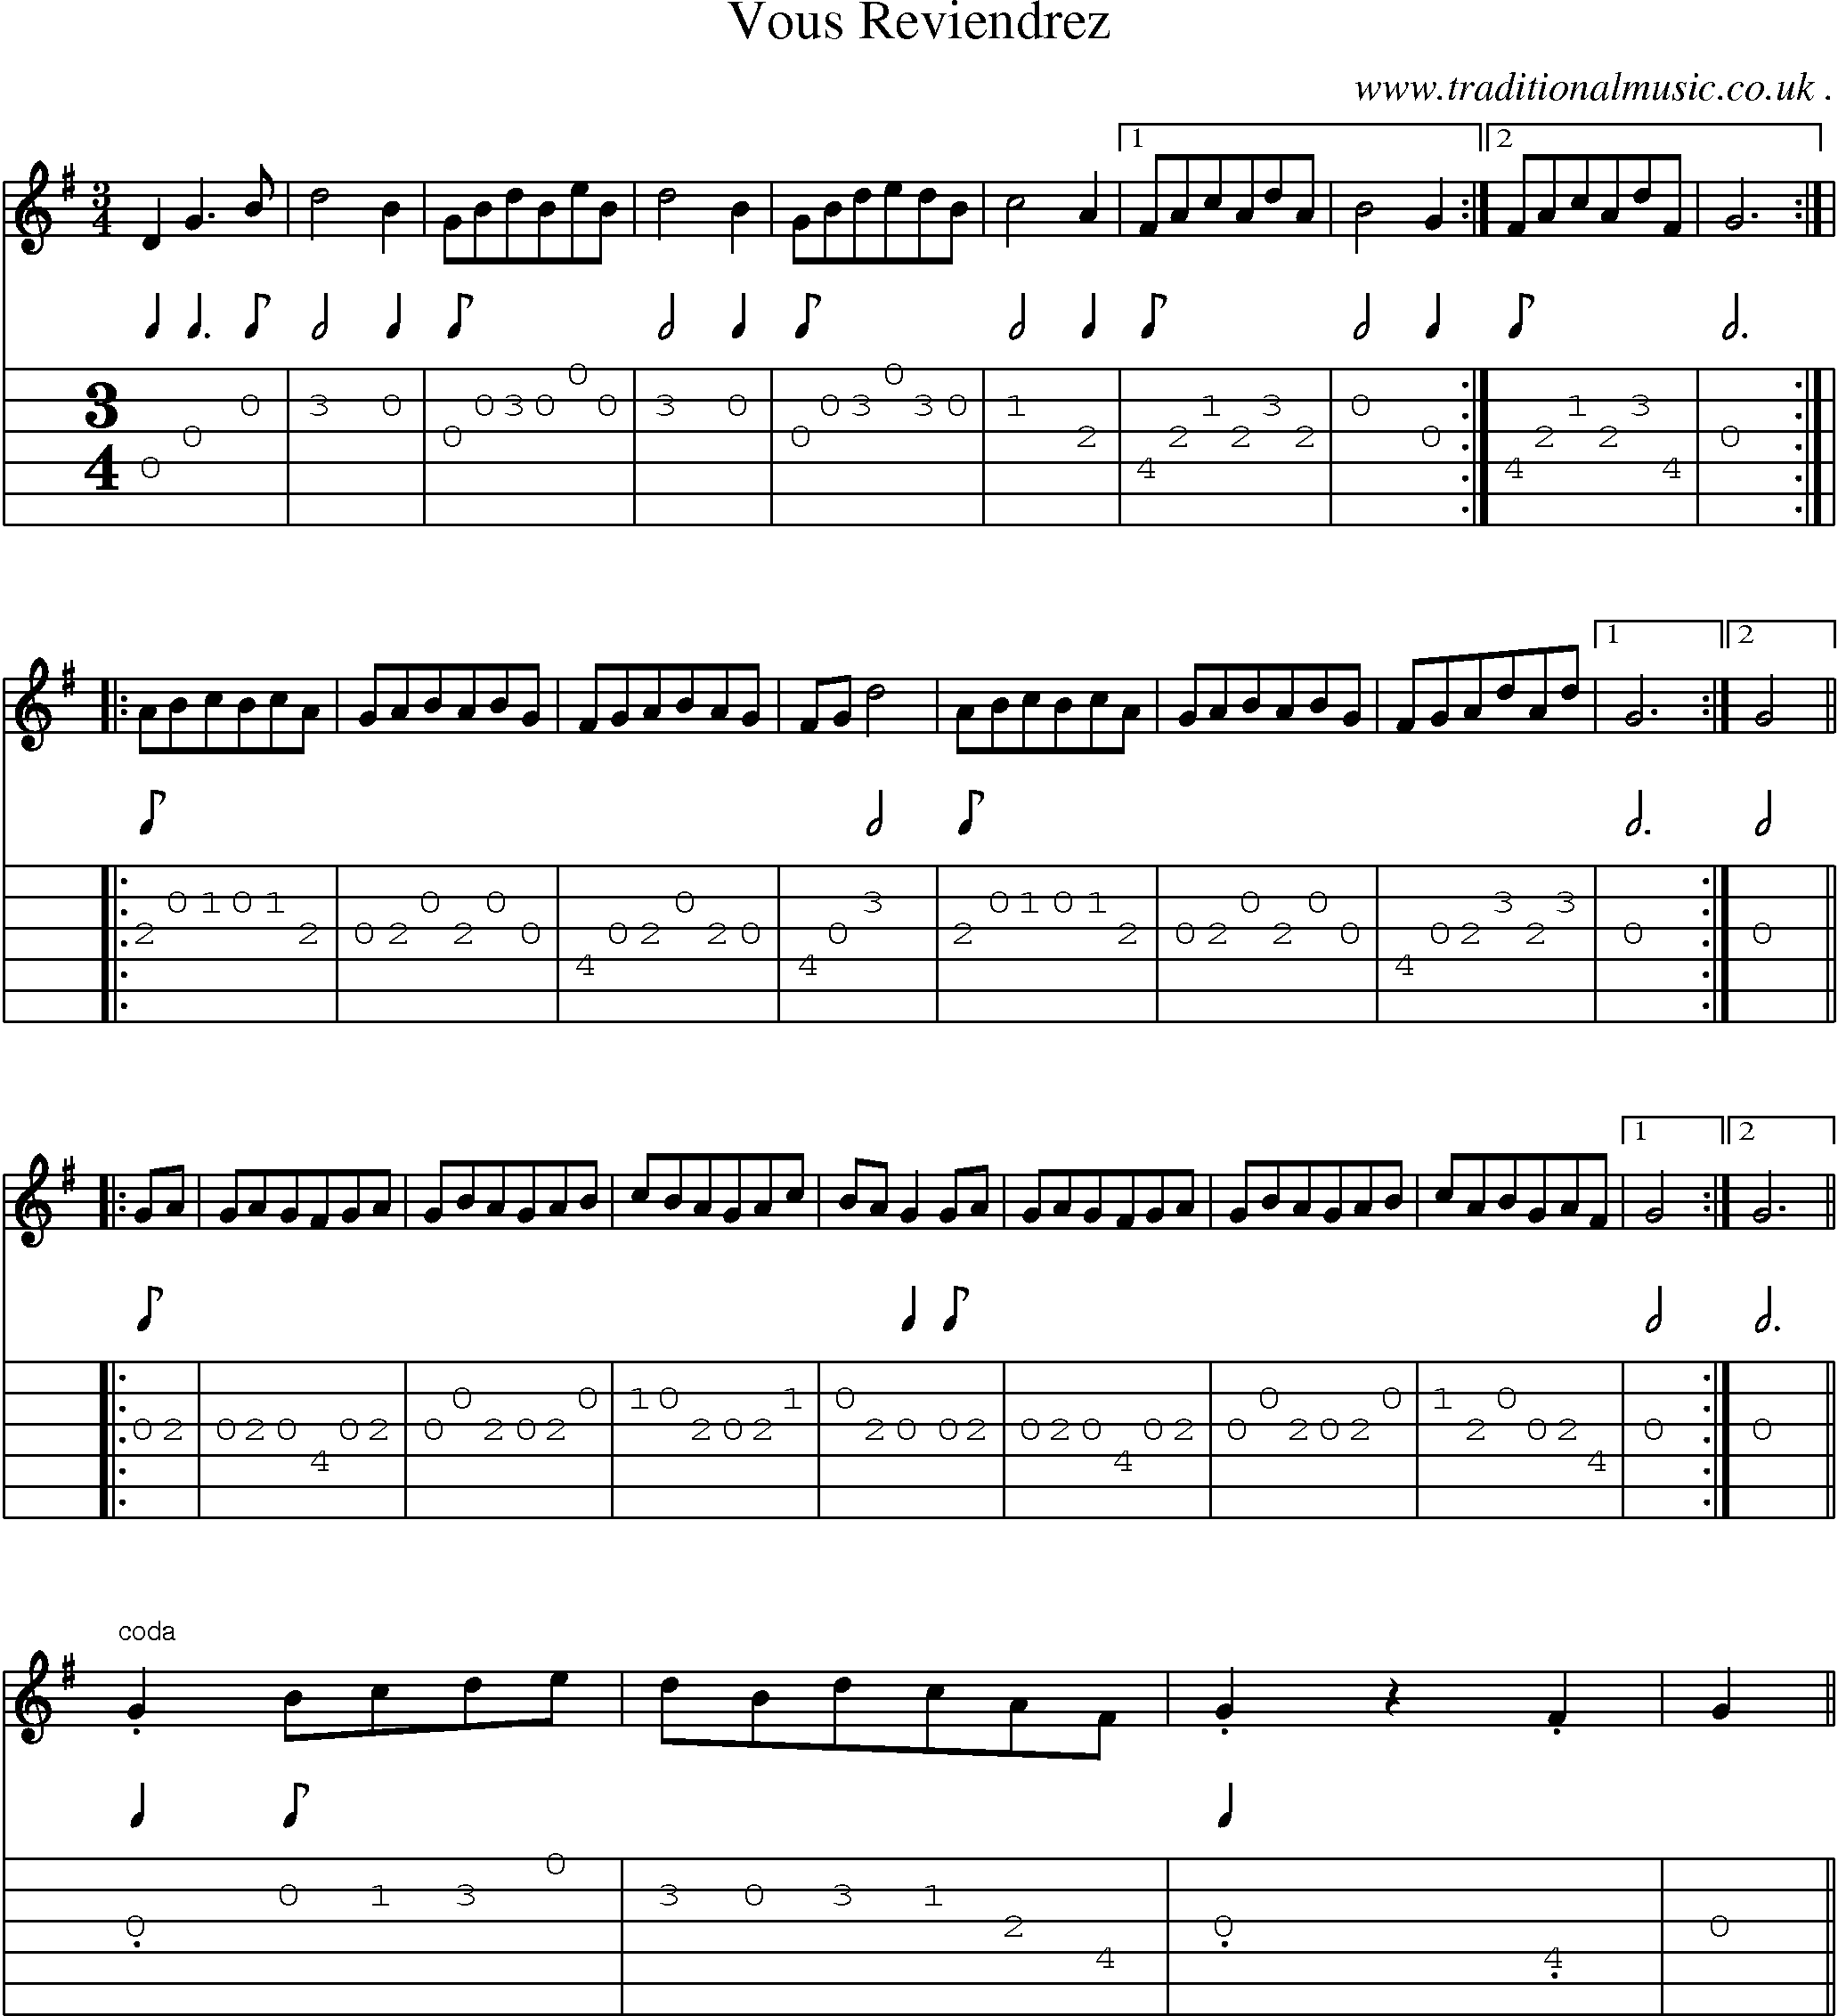 Sheet-Music and Guitar Tabs for Vous Reviendrez